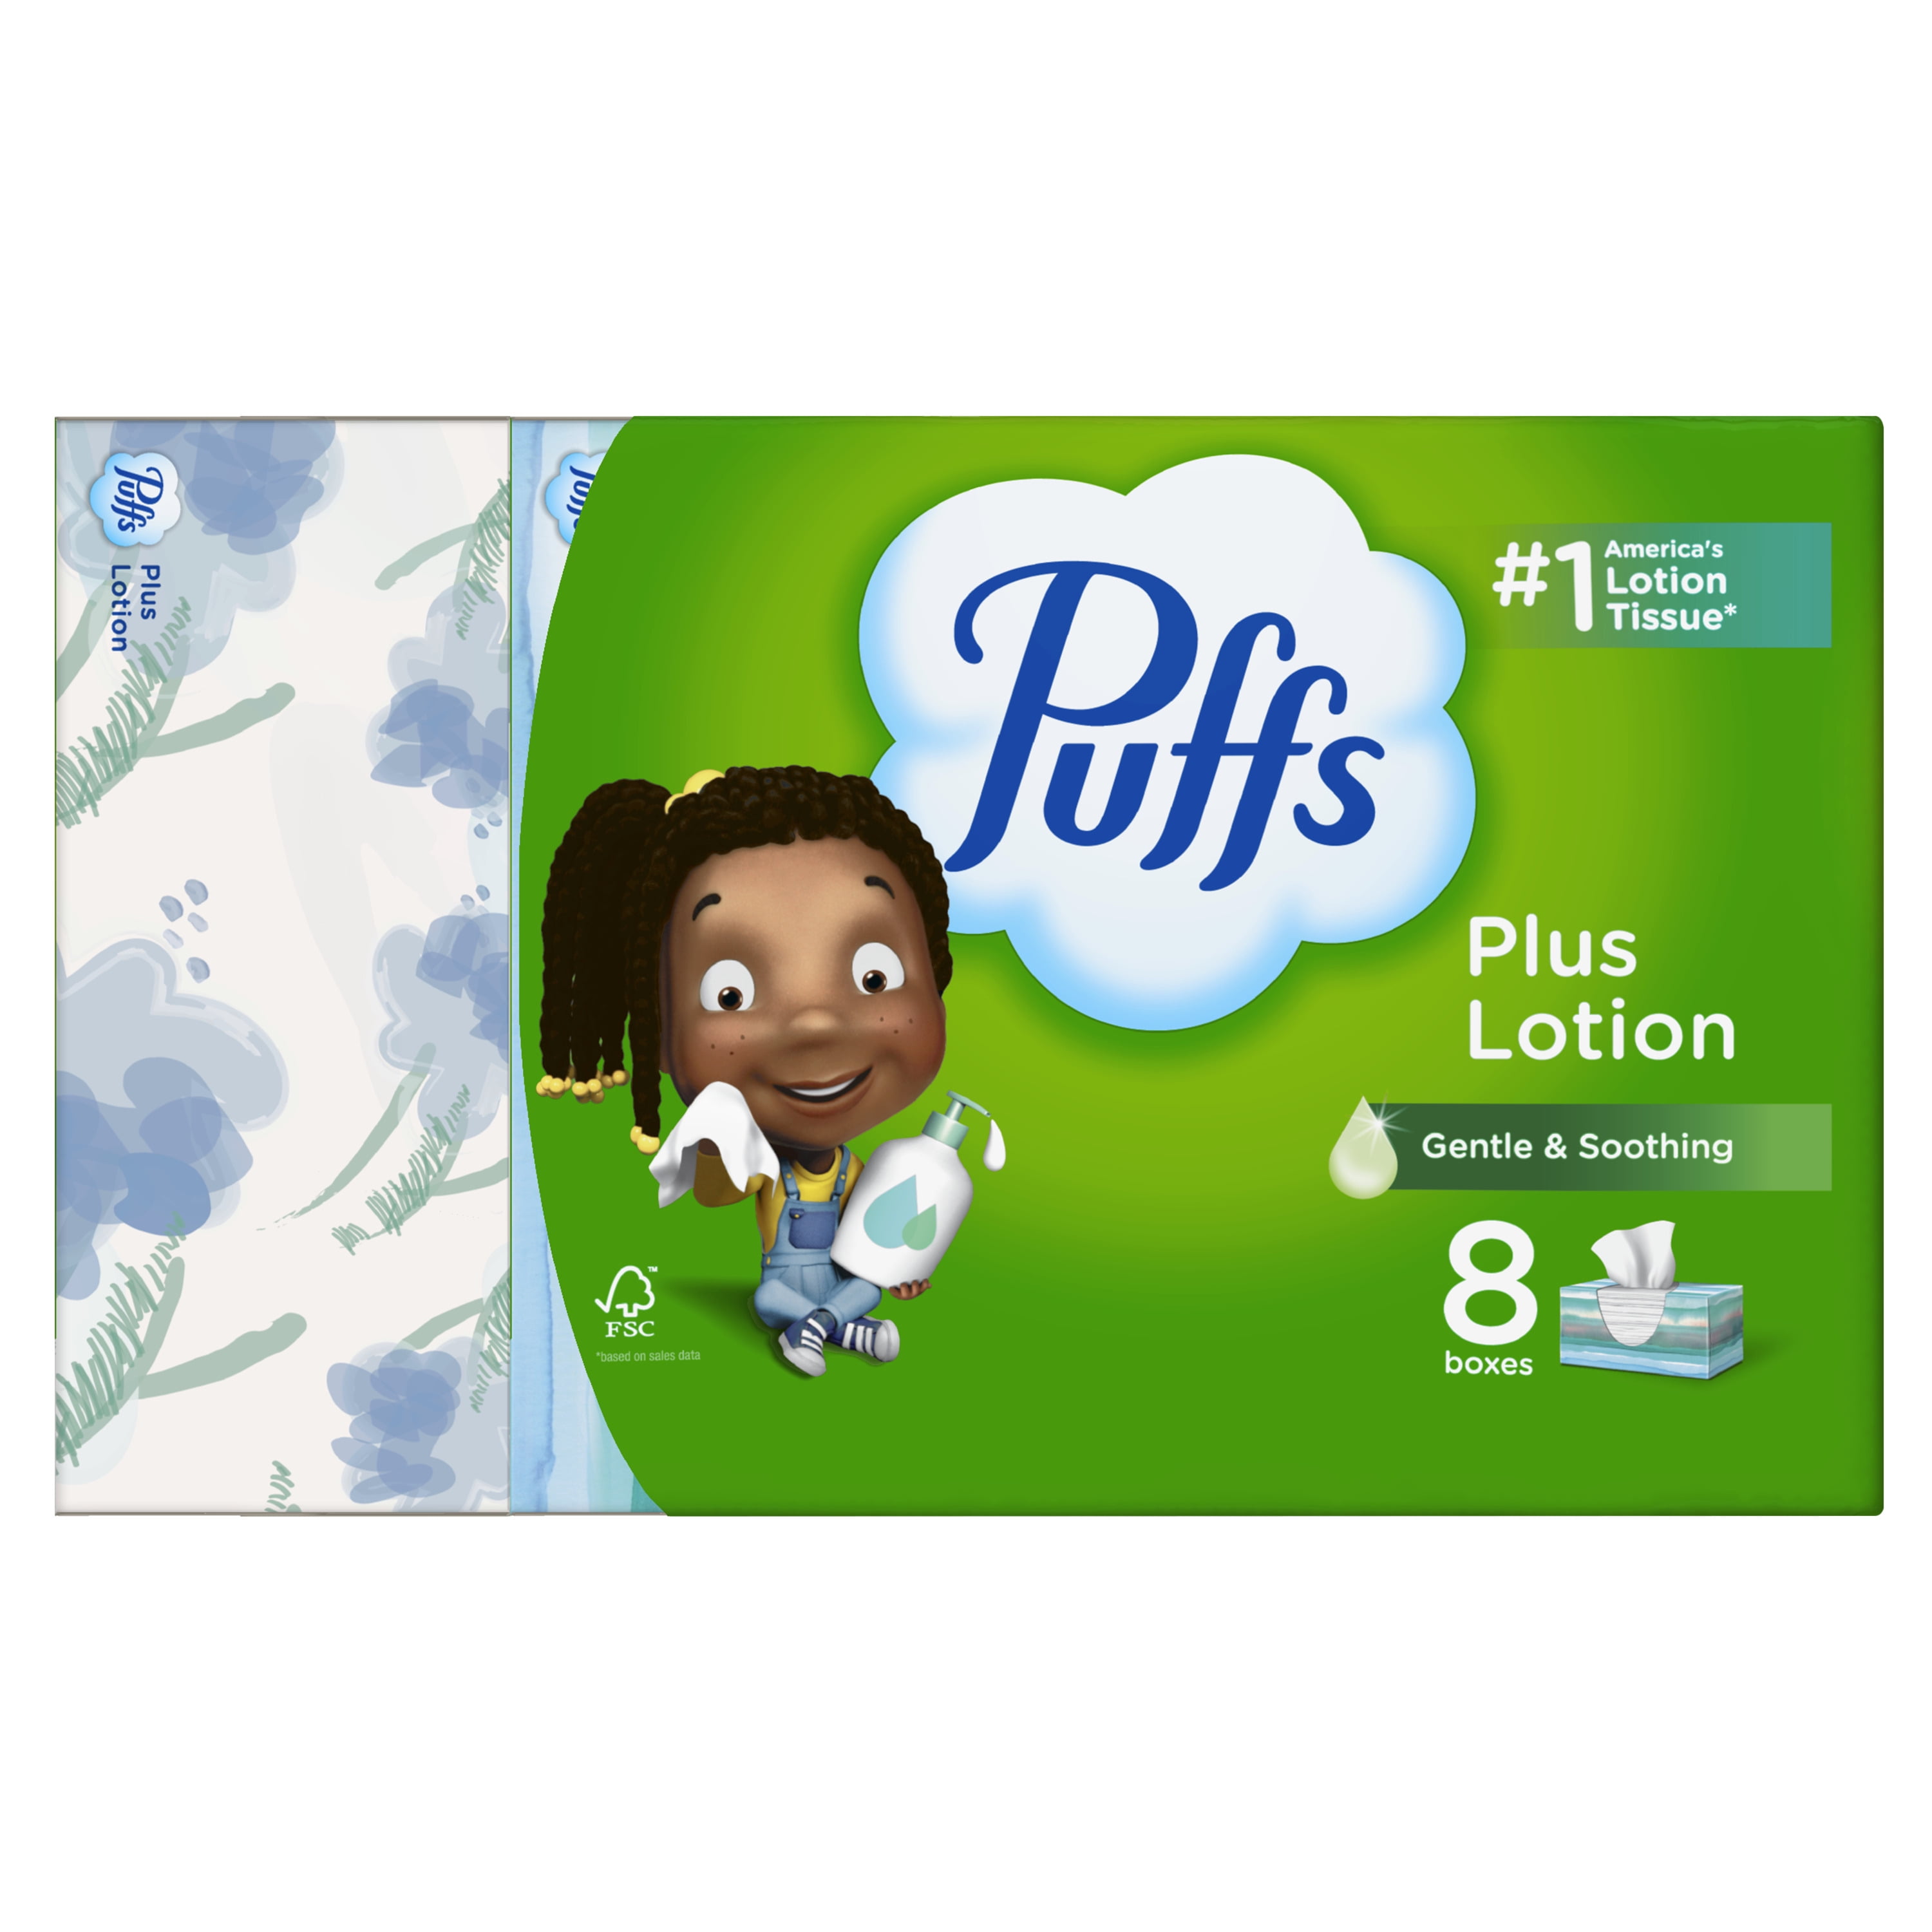 Puffs Plus Lotion Family Facial Tissues, 6 pk / 124 ct - Fry's